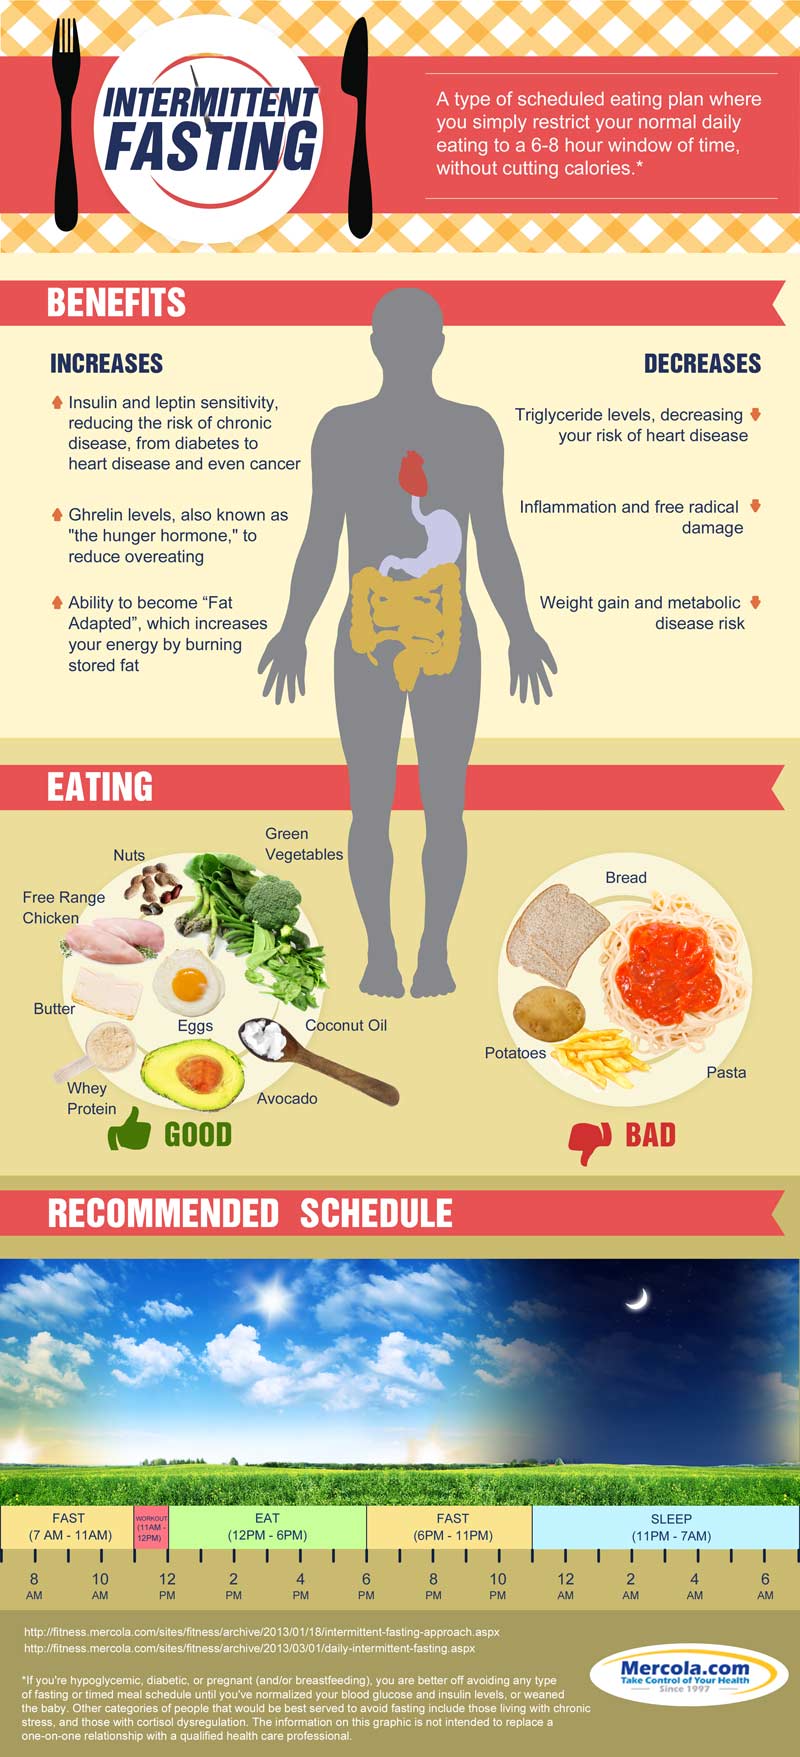 The Benefits of Intermittent Fasting - Mercola